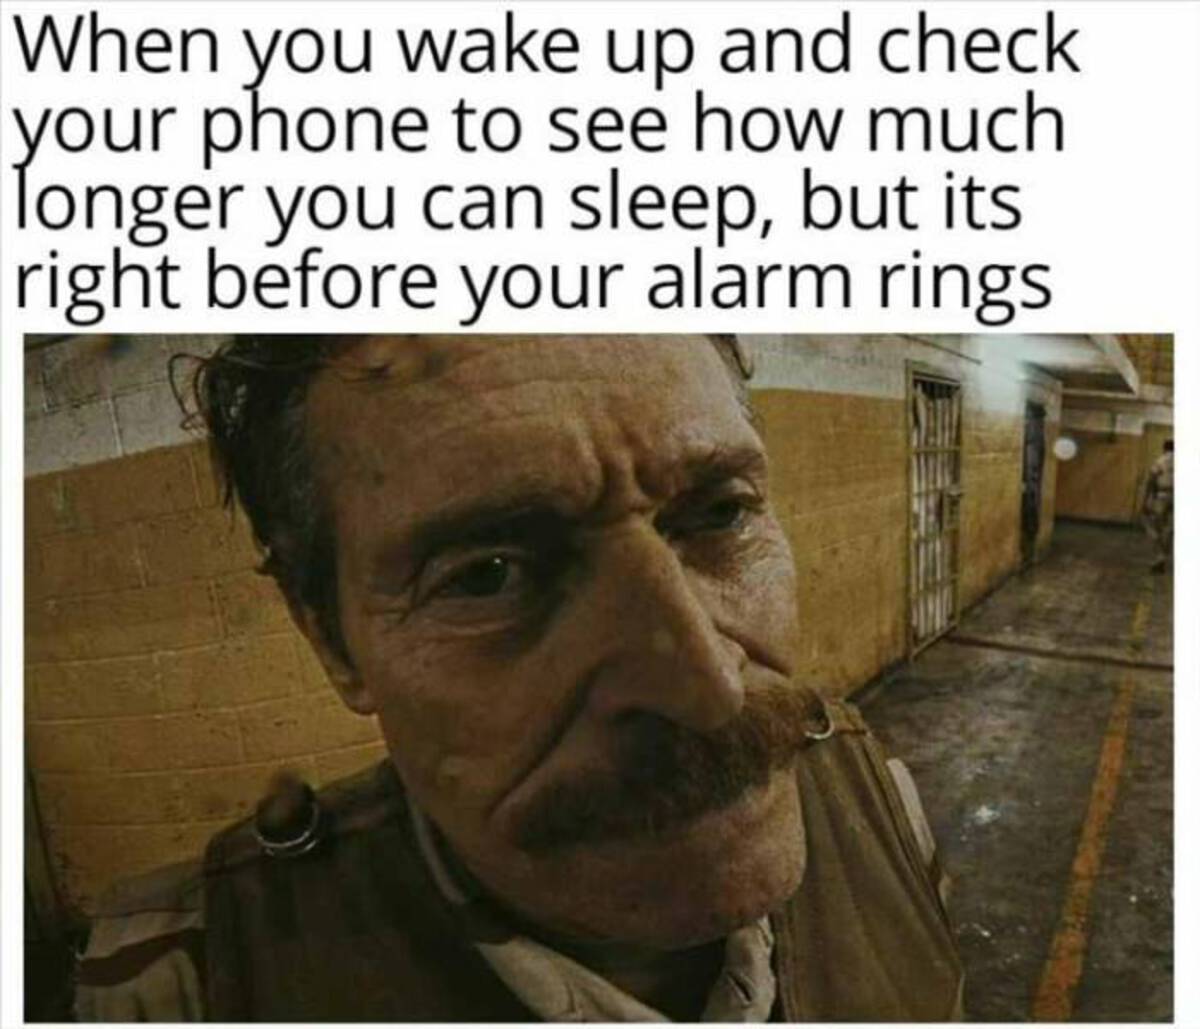 photo caption - When you wake up and check your phone to see how much longer you can sleep, but its right before your alarm rings